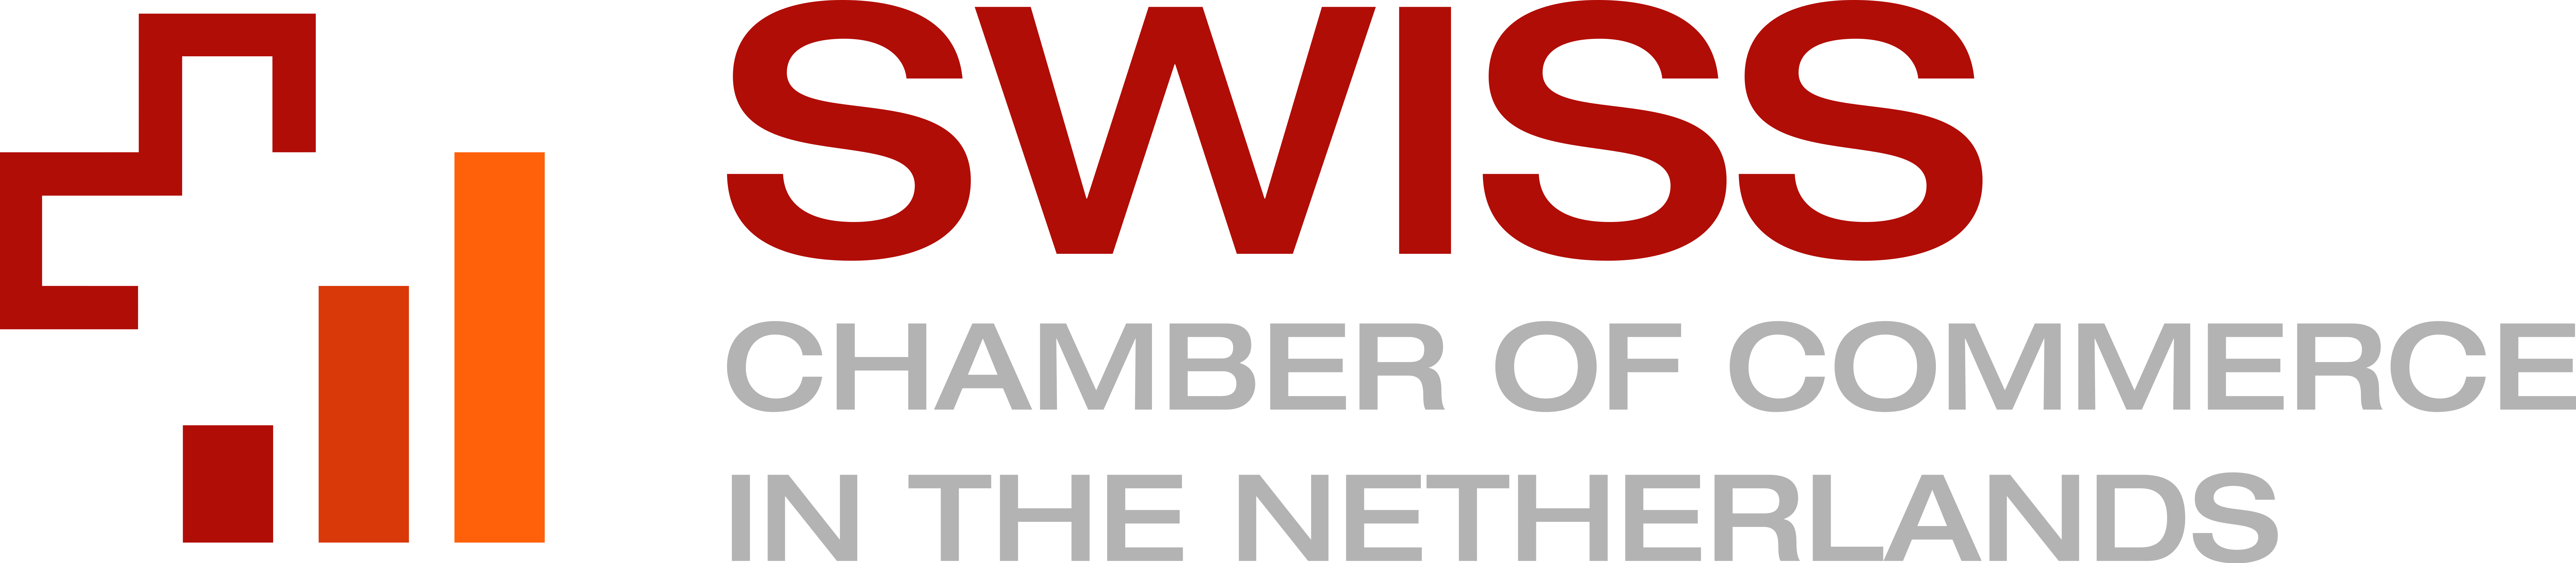 Swiss Chamber of Commerce in The Netherlands